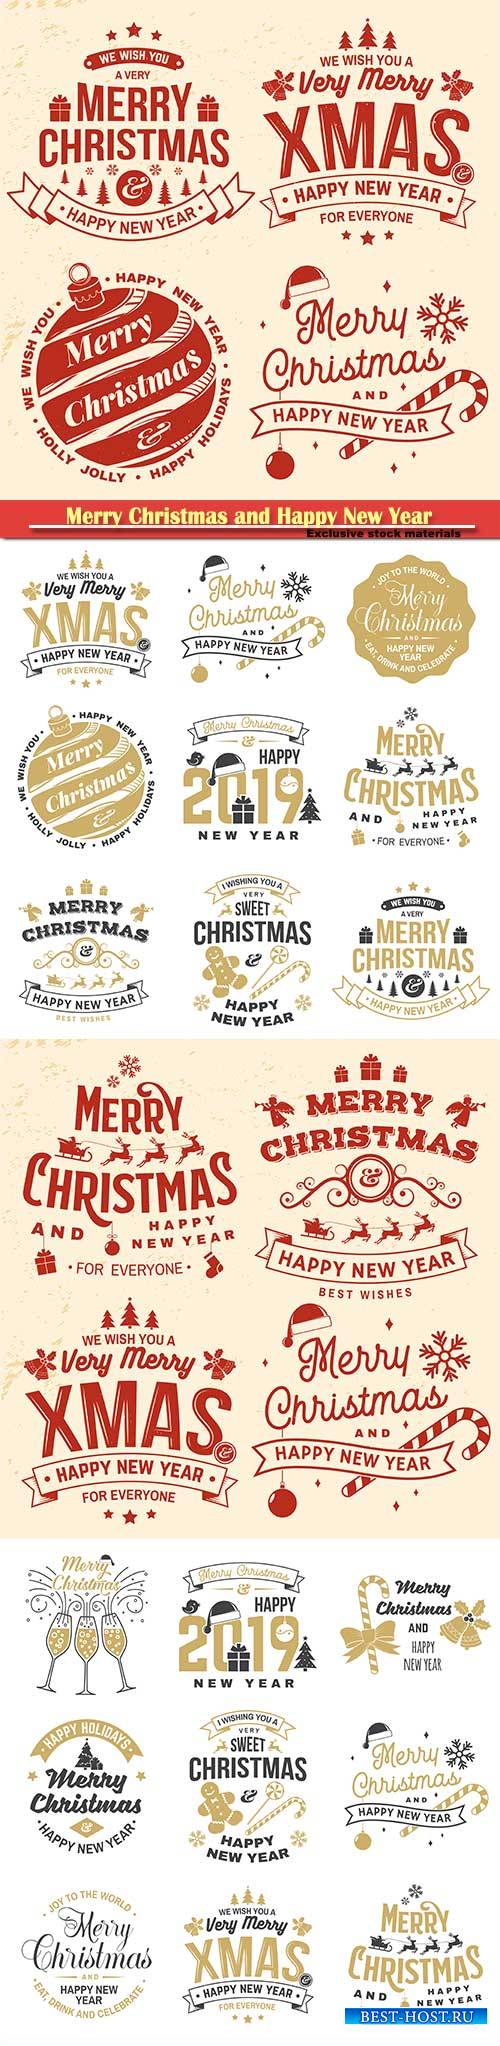 Merry Christmas and 2019 Happy New Year stamp, sticker set